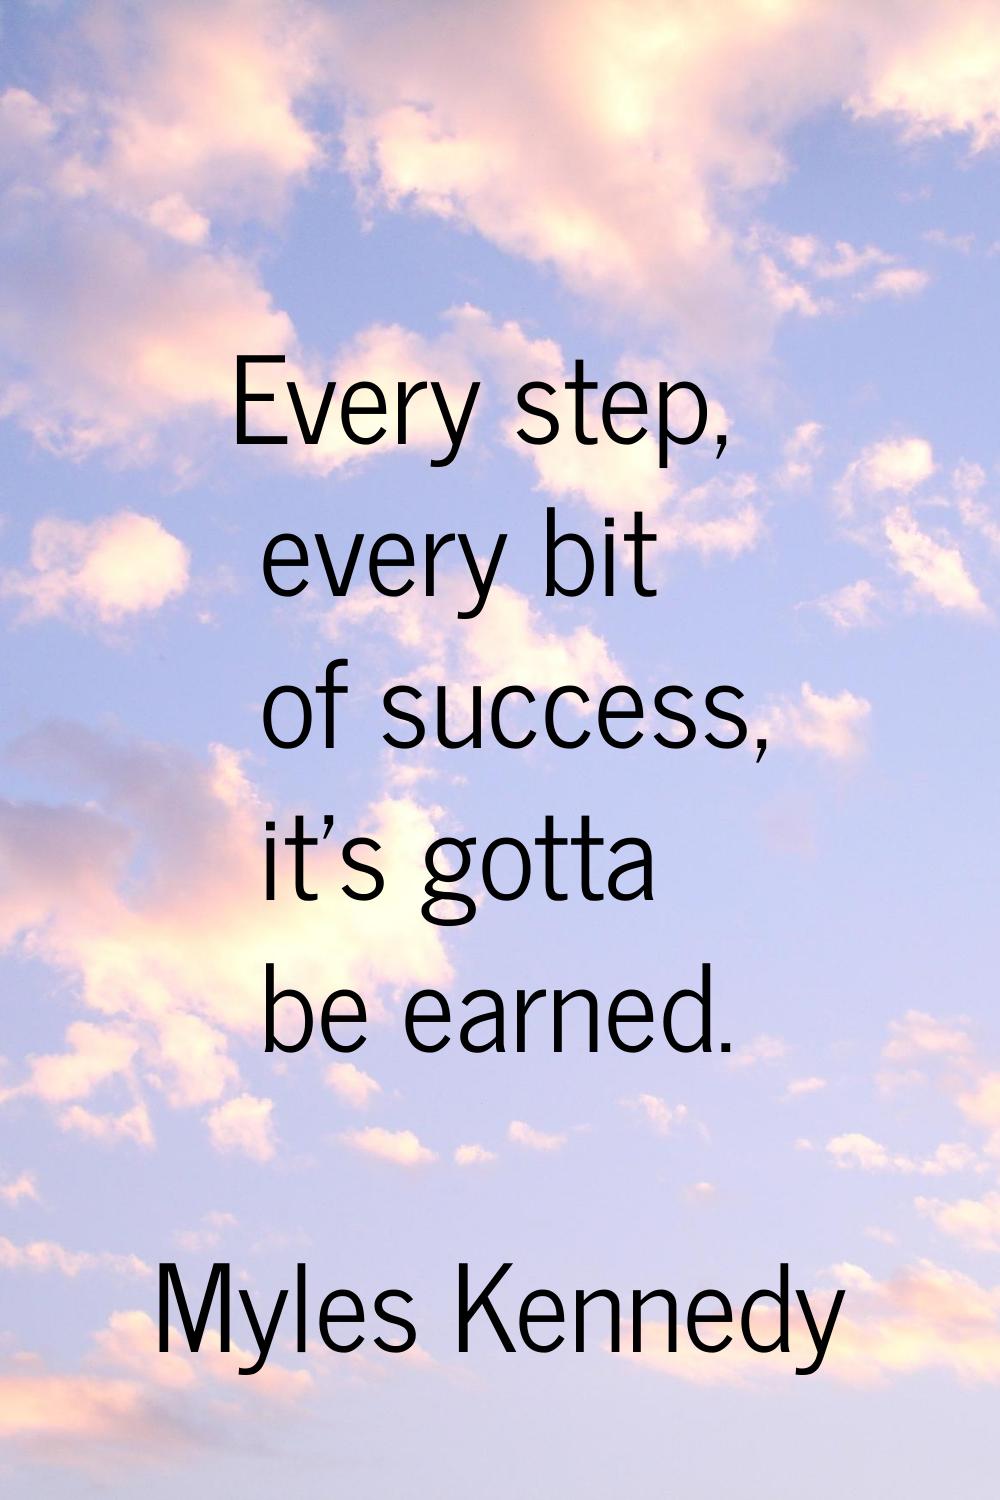 Every step, every bit of success, it's gotta be earned.